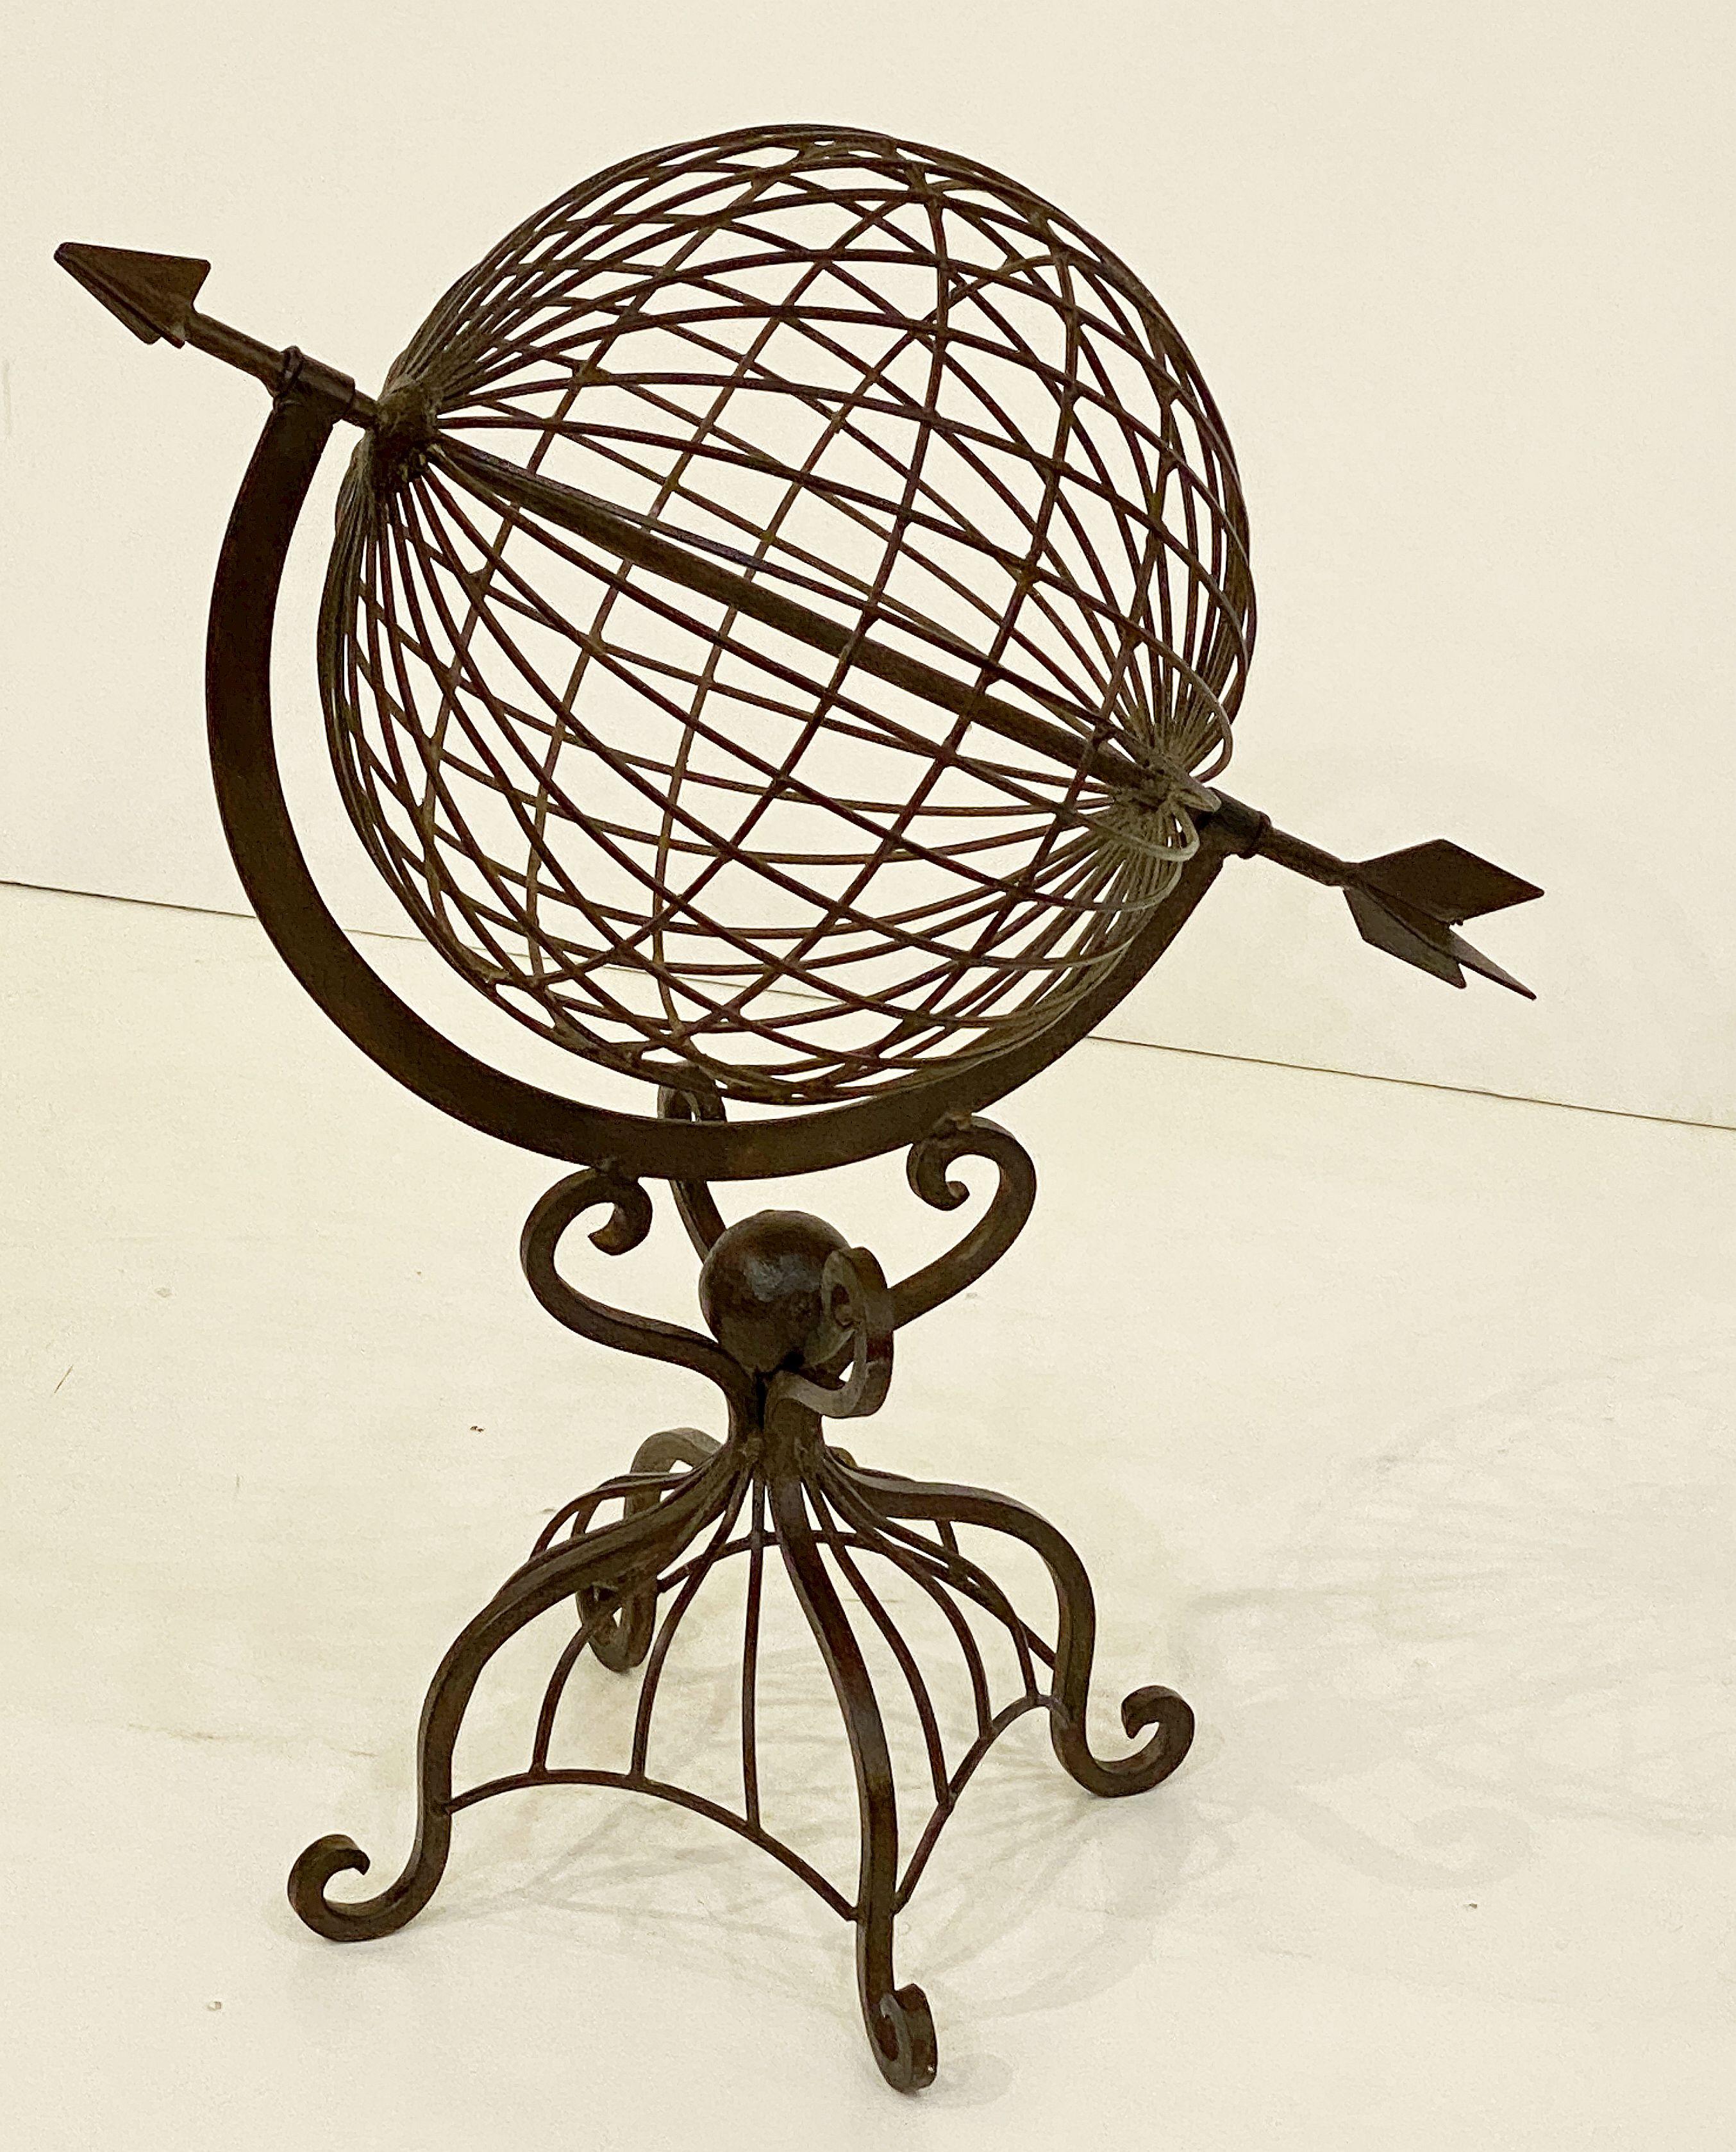 A fine French armillary sphere or decorative garden ornament of wrought iron featuring an arrow positioned in a globe mounted to a four-legged support stand.

Dimensions: H 23 1/2 inches x W 20 inches x D 12 inches

An armillary sphere is a